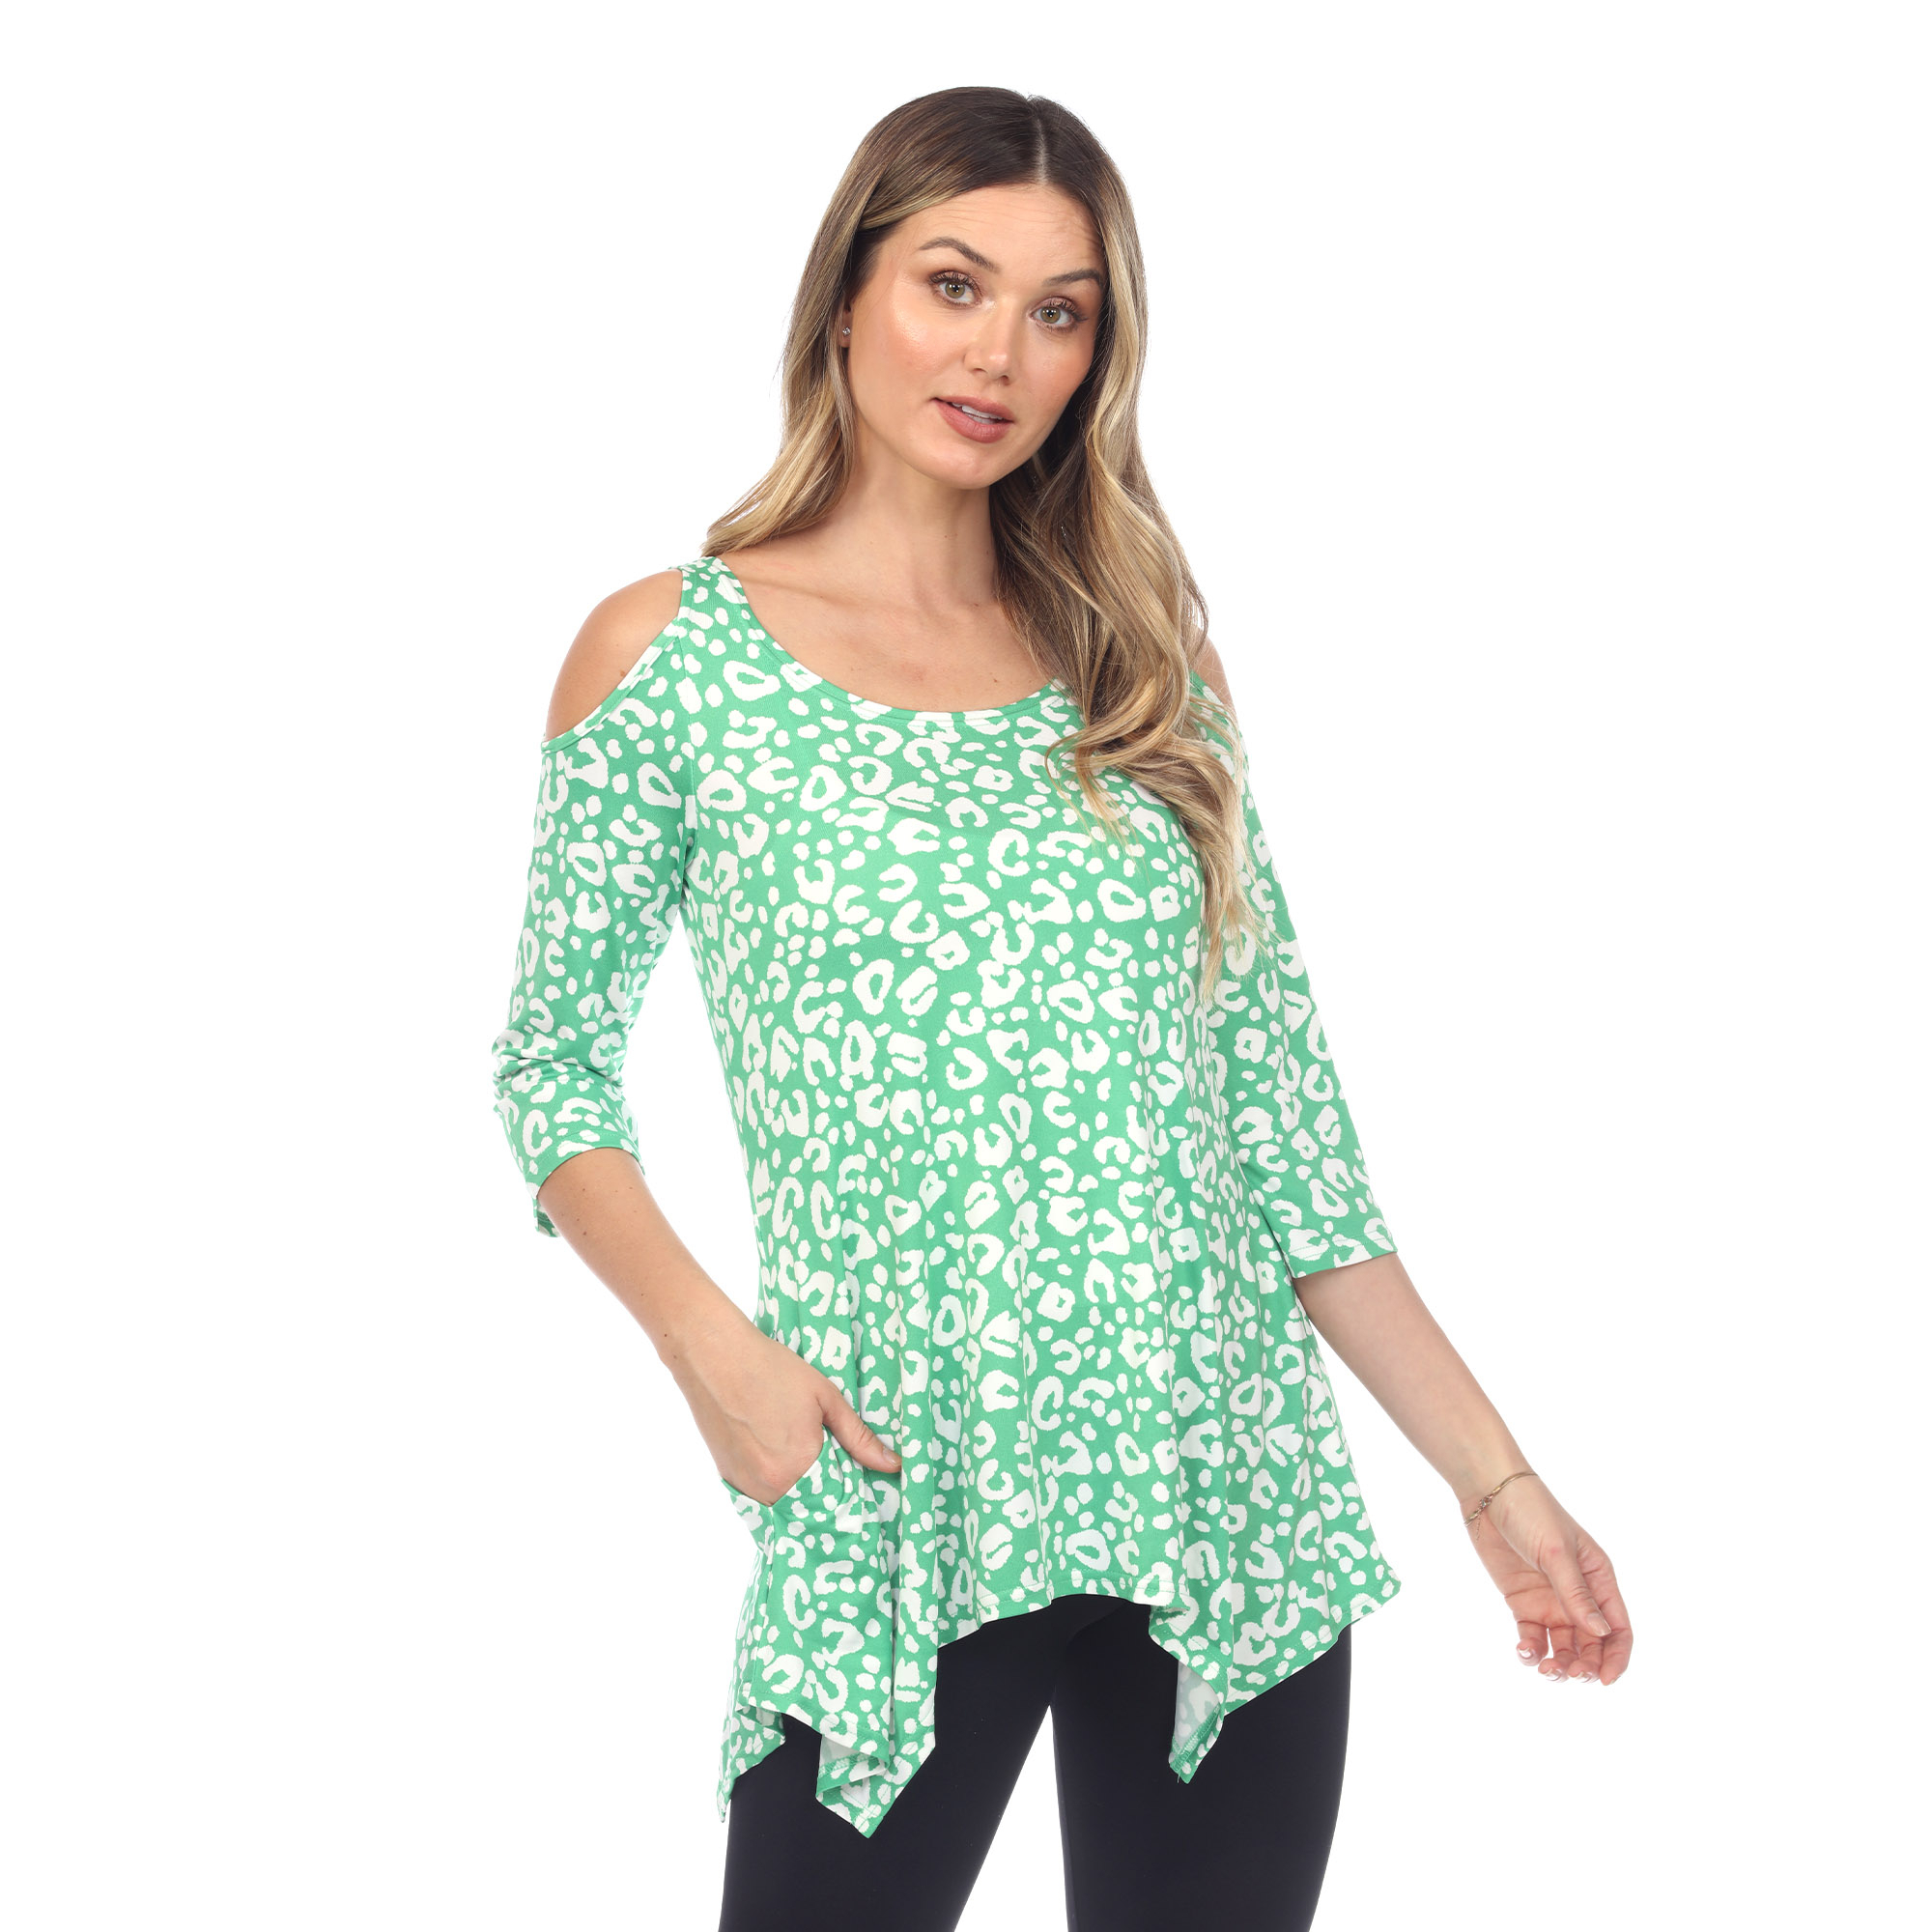 White Mark Women's Leopard Print Cold Shoulder Tunic Top With Pockets - Green, X-Large